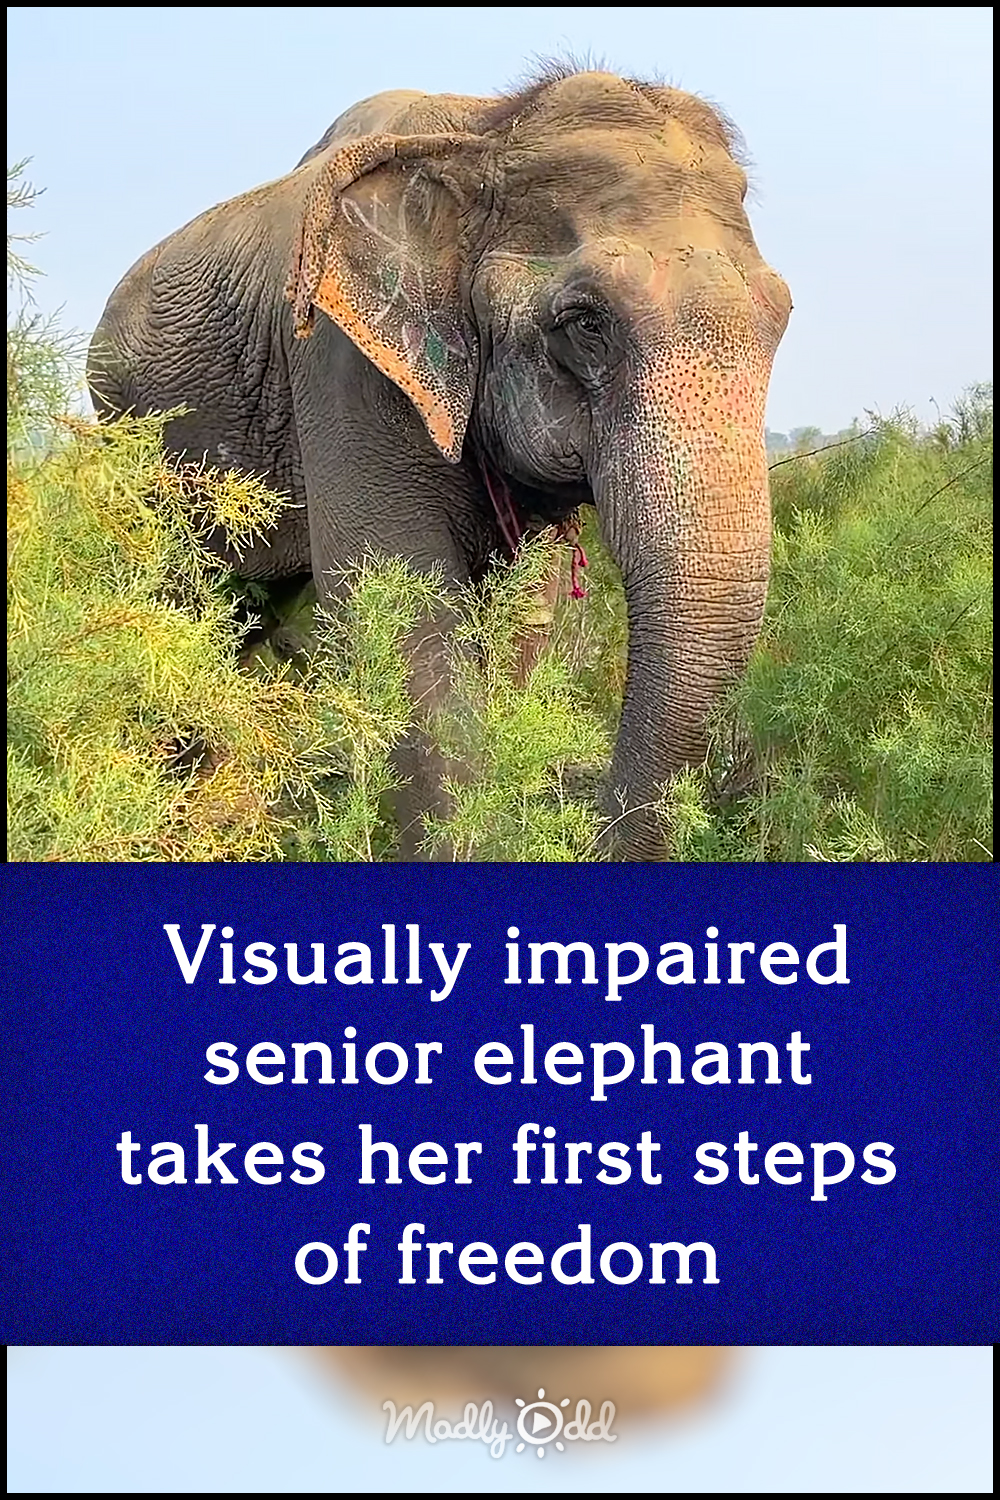 Visually impaired senior elephant takes her first steps of freedom